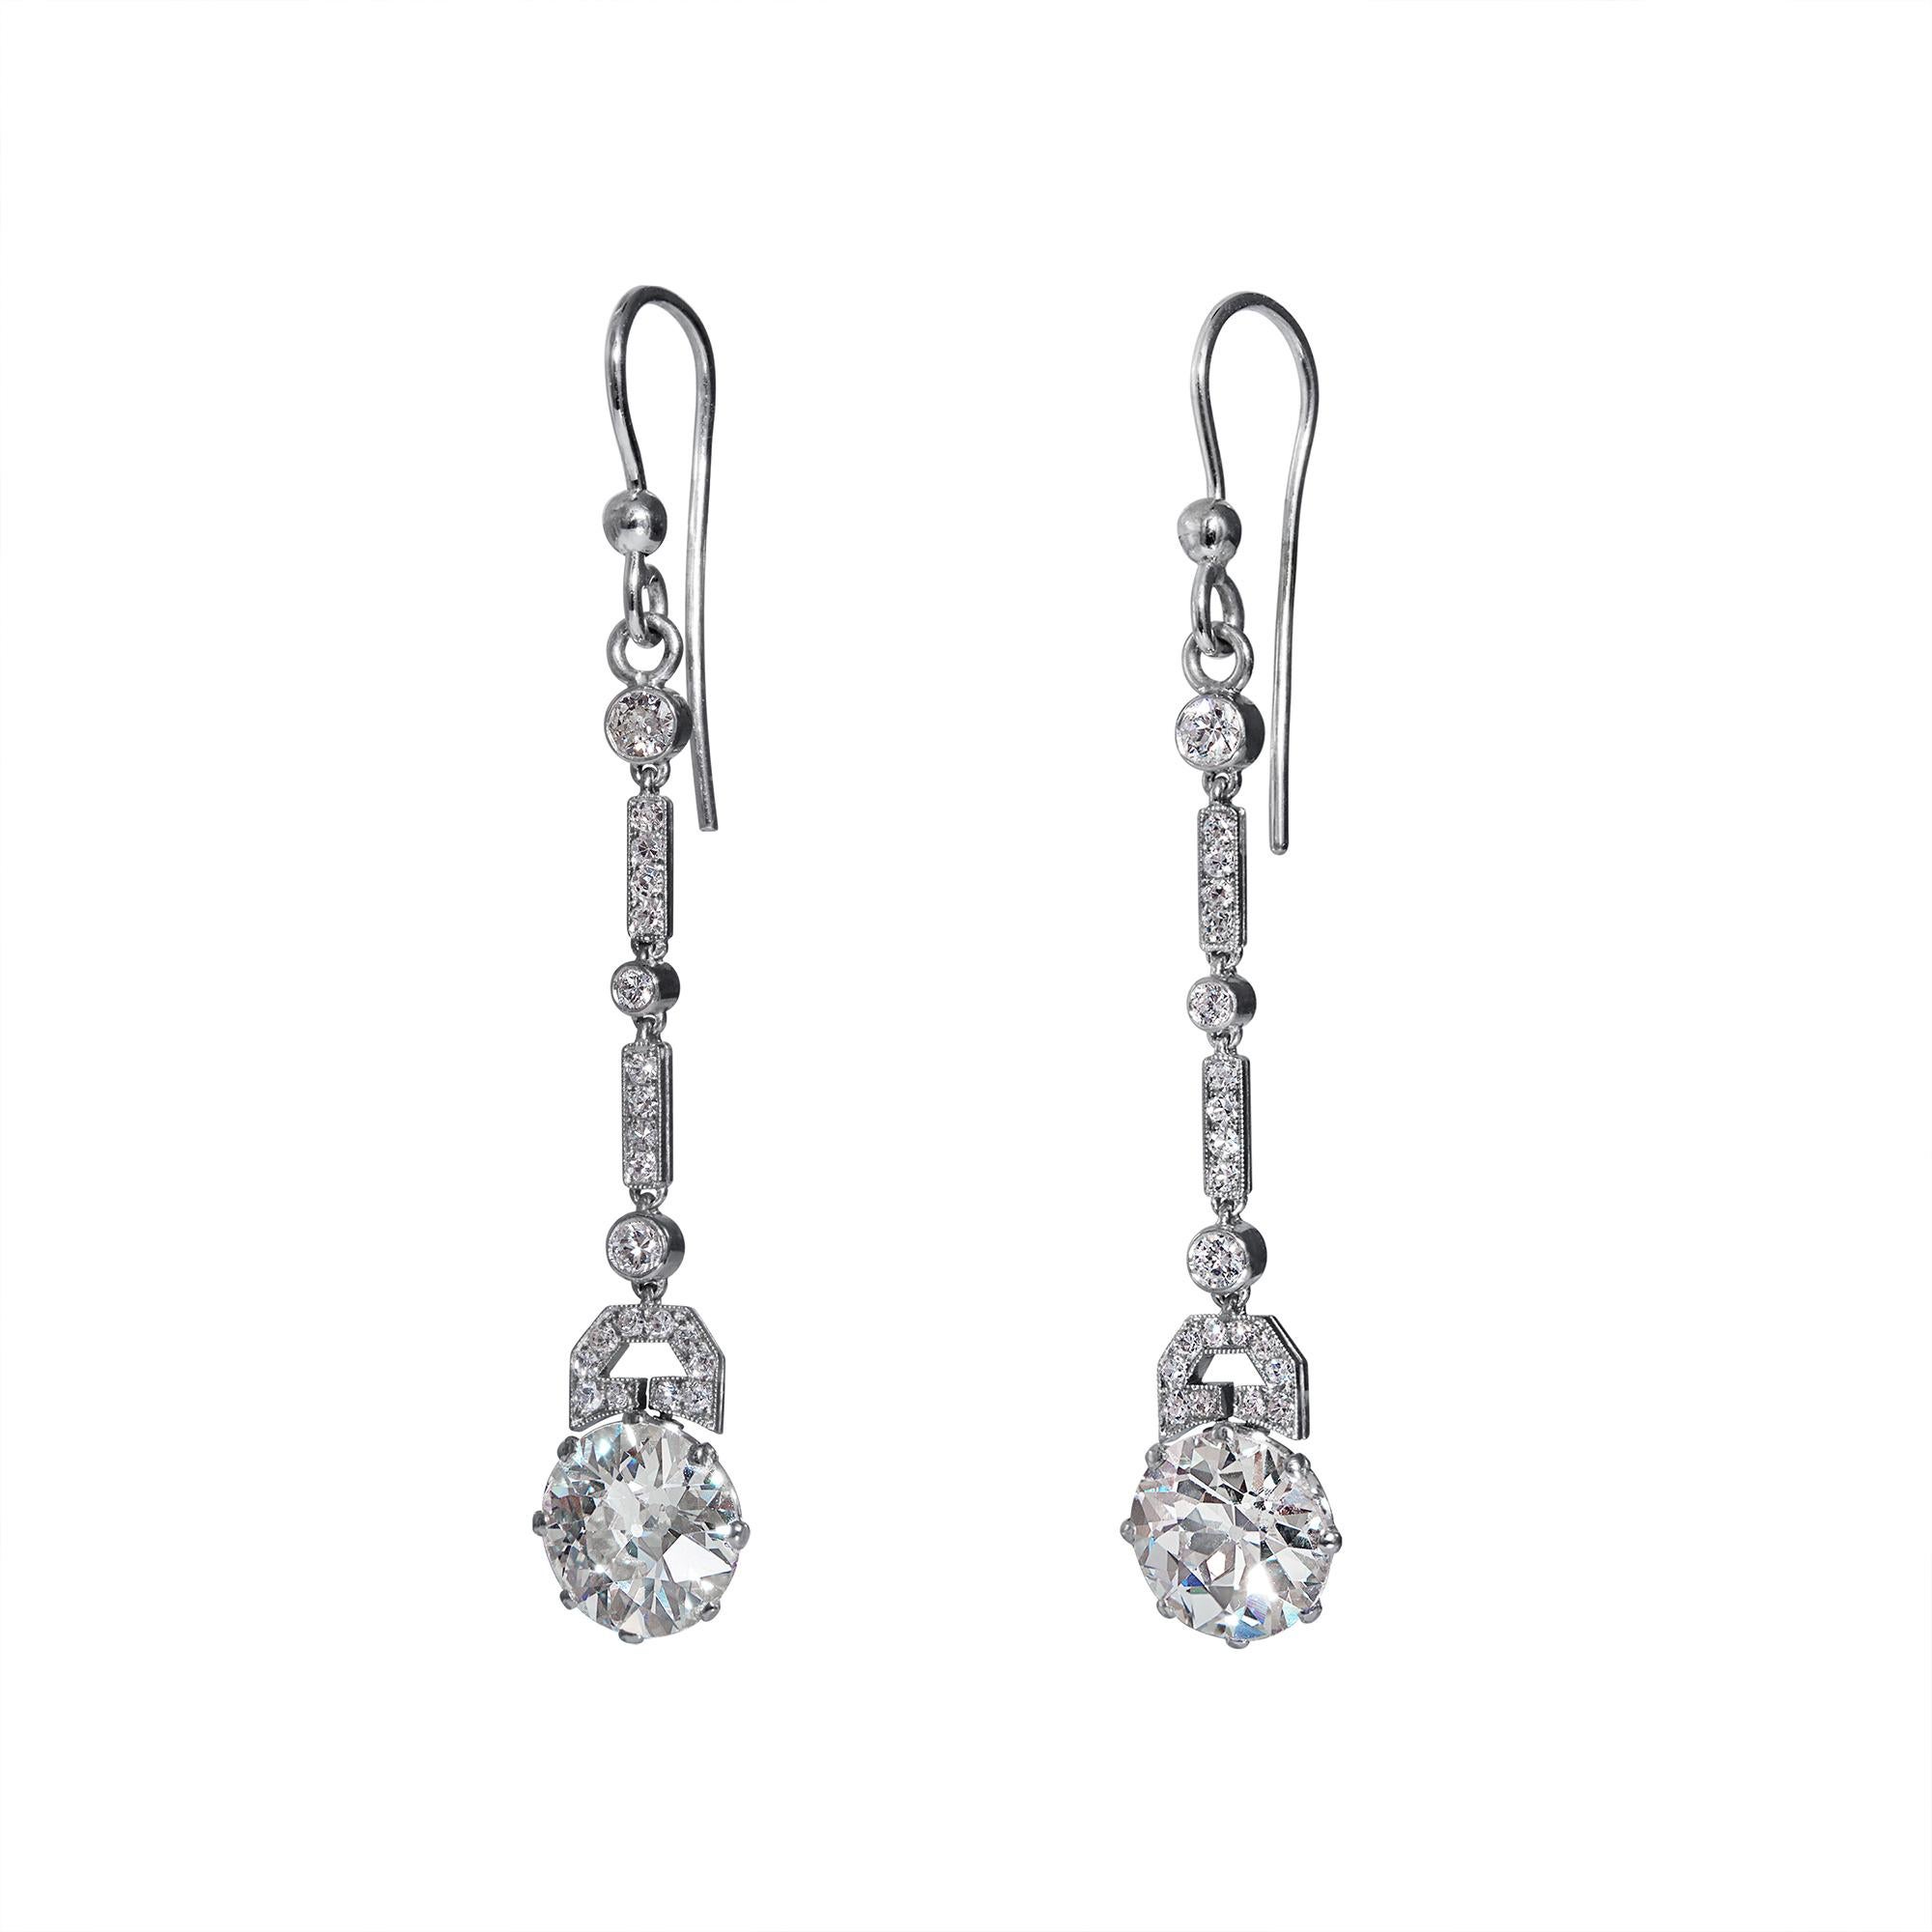 A sleek and sexy pair of ART DECO 5.71ctw Diamond Drop Earrings in Platinum, dating from CIRCA 1920s.

Unique and Exquisite pair of these Authentic Art Deco Earrings will take your breath away! Platinum Dangles are encrusted with Old European and